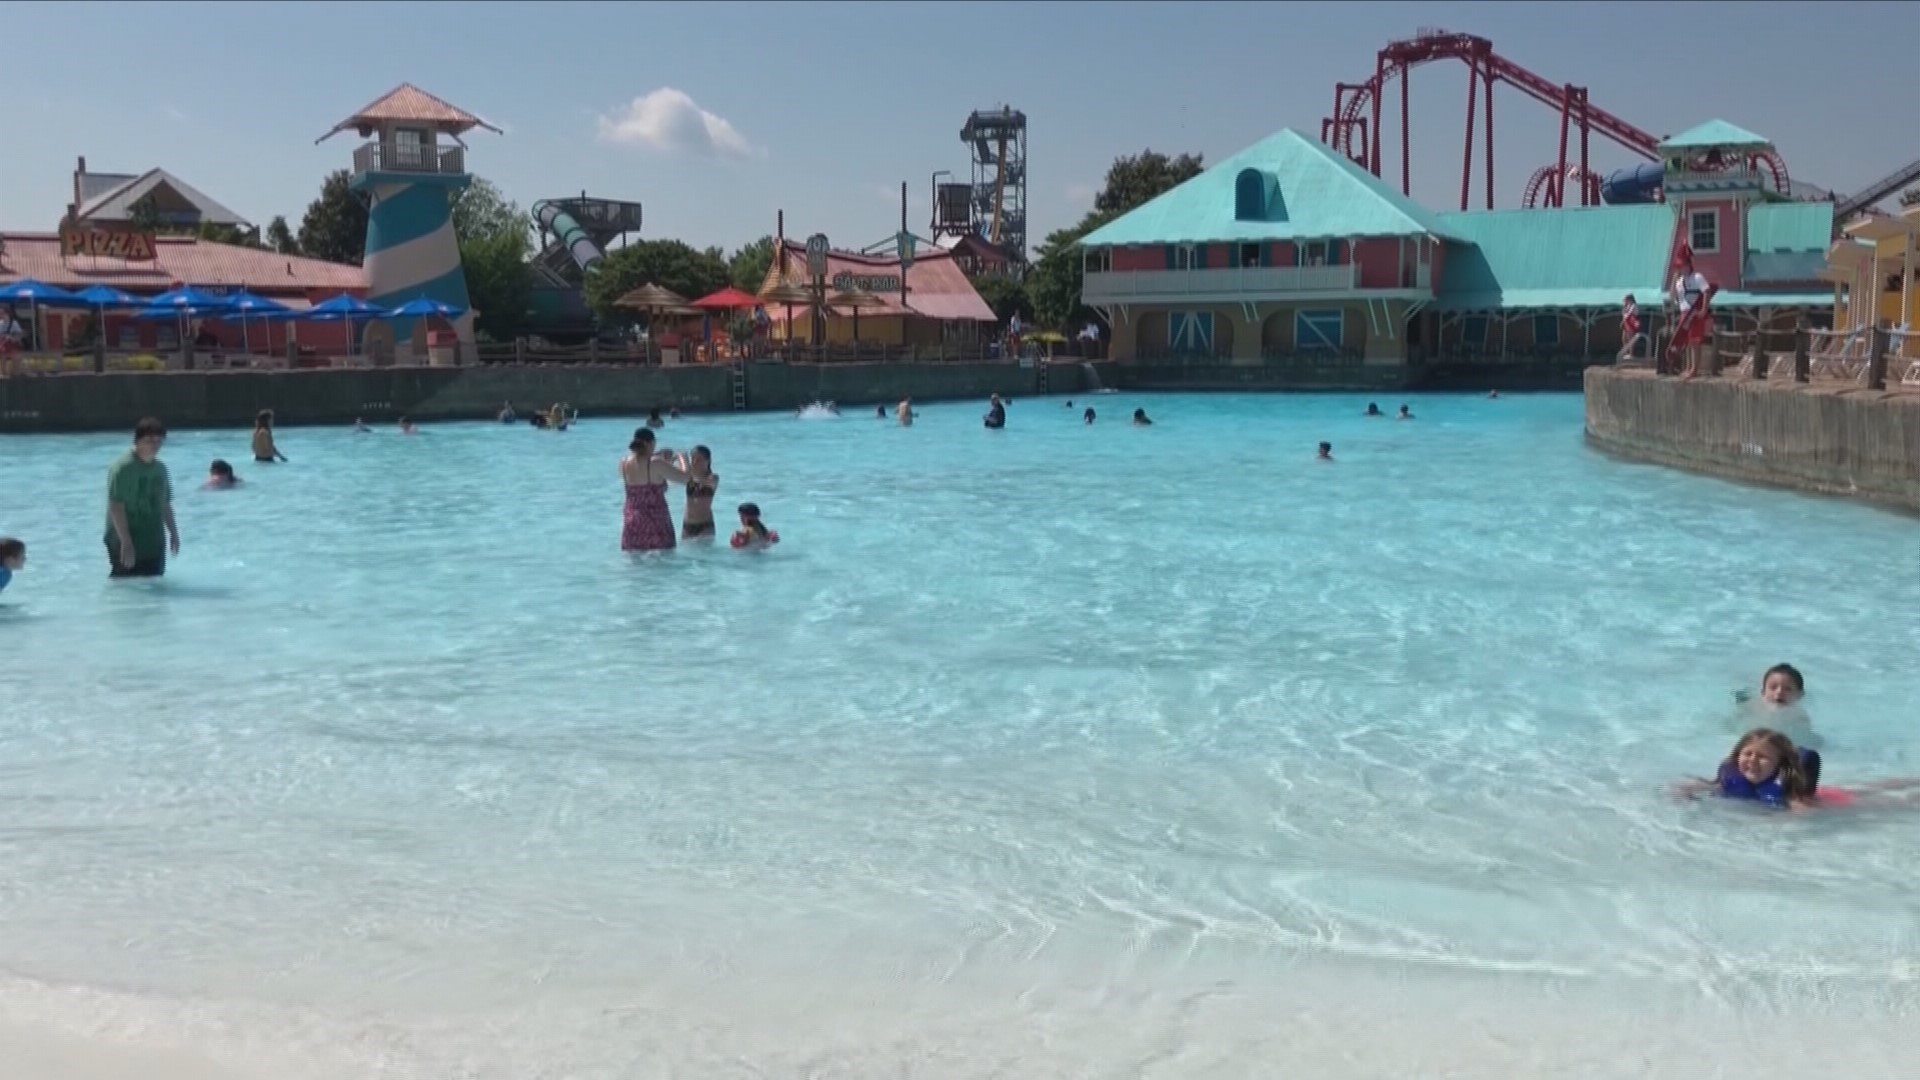 Just in time for a very hot weekend, two water parks are opening to the public. Social distancing guidelines will still need to be followed.